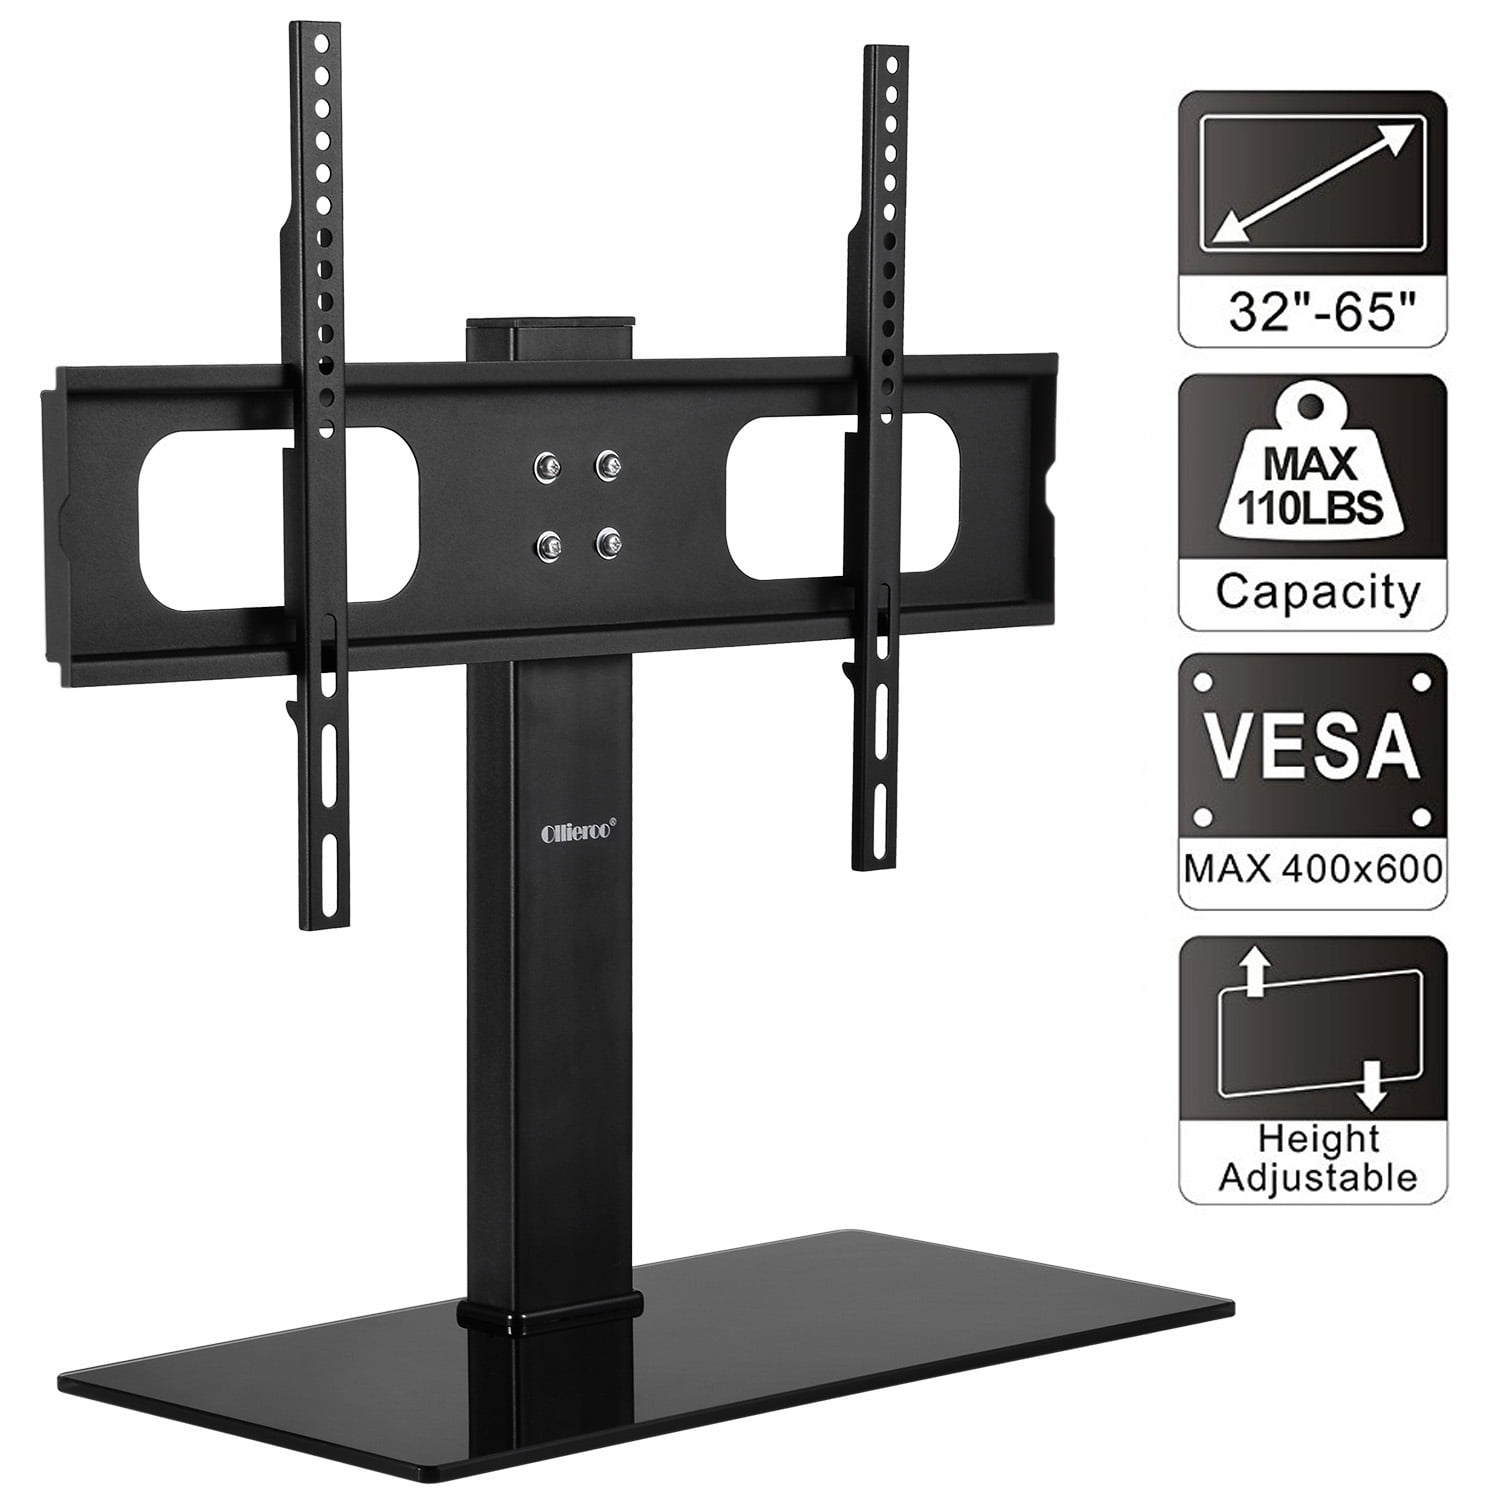 Mllieroo Universal Height Adjustable Table Top TV Stand - TV Mount Stand with Tempered Glass Base 32-65 inch LCD LED TVs ，VESA - Walmart.com